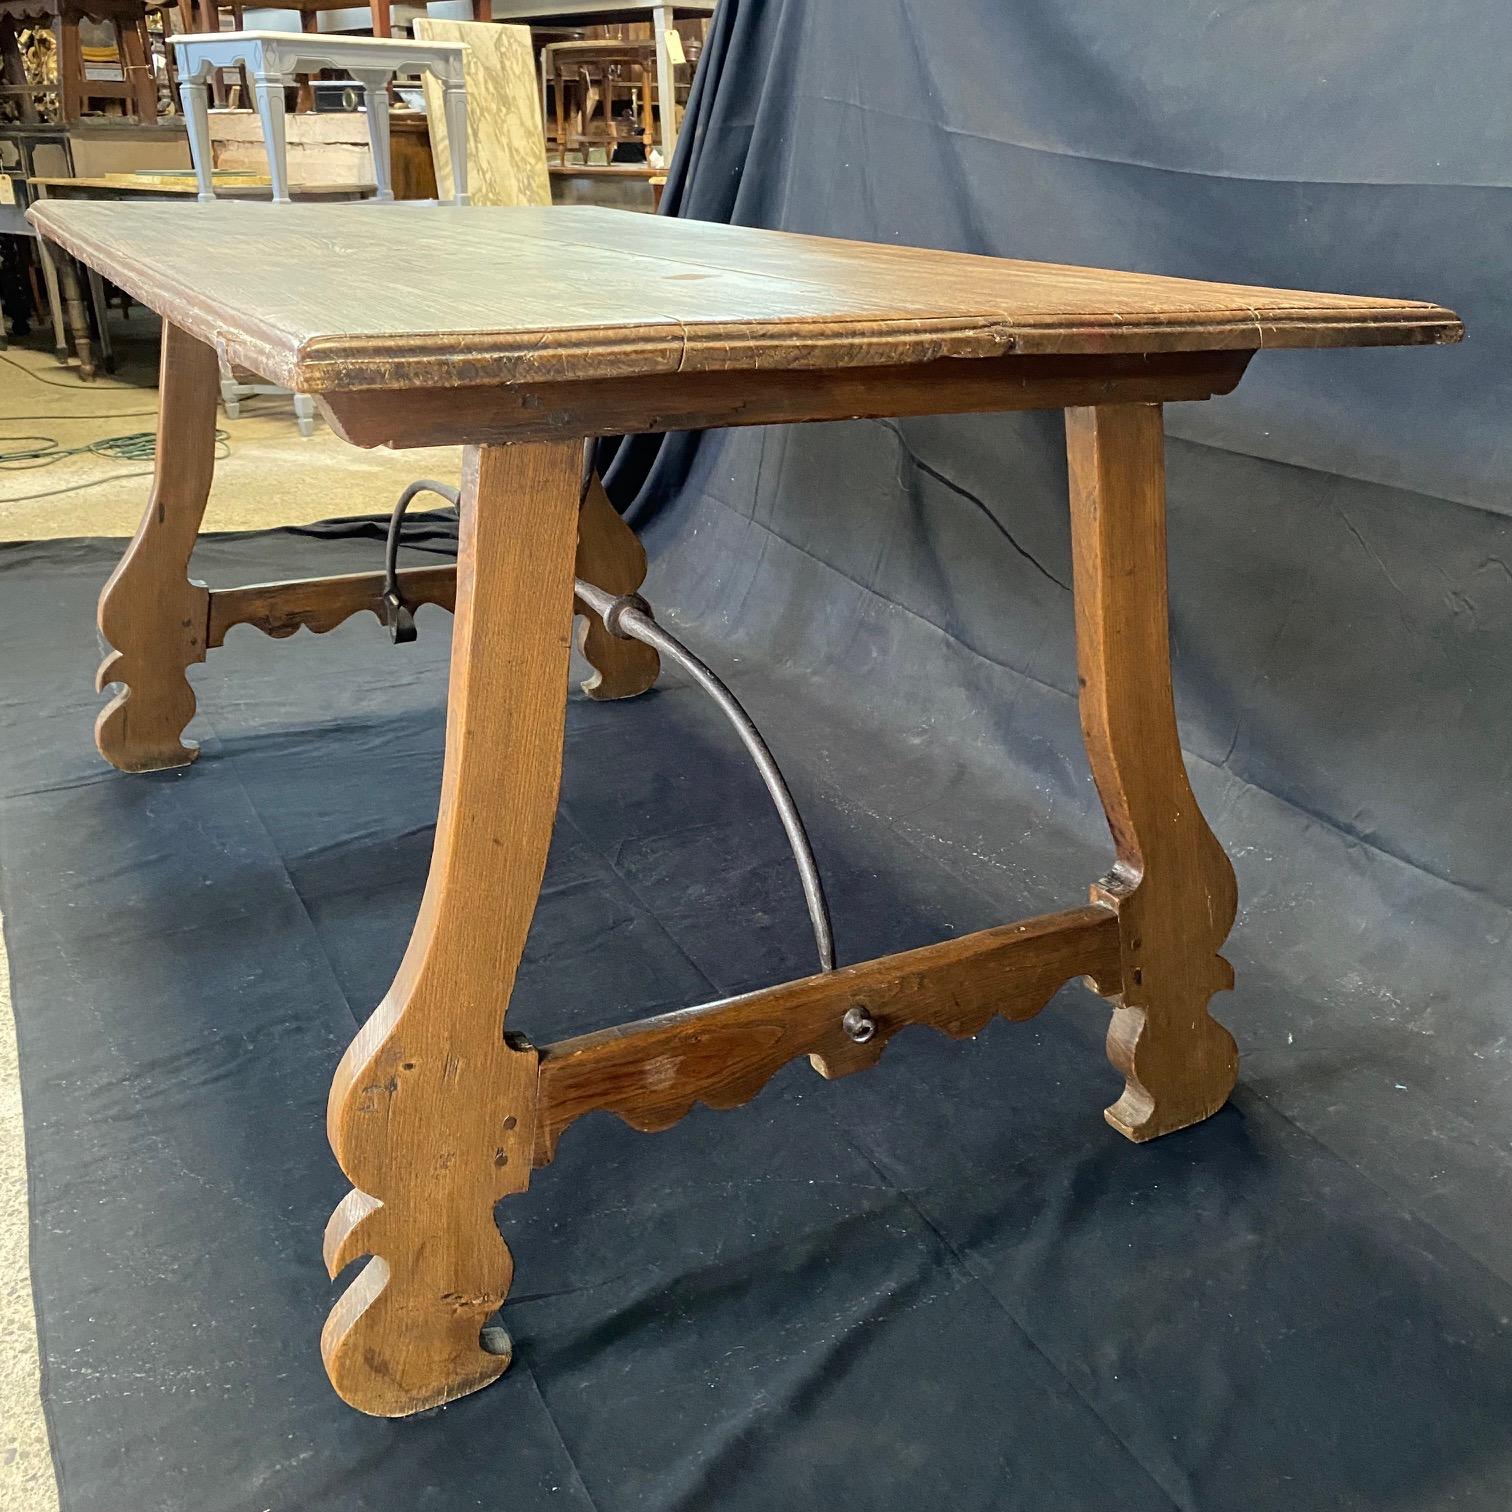 Beautiful early 19th century Italian baroque dining table in walnut with rustic plank top resting on carved H form trestle legs and hand forged iron stretchers. A great table as a console under a large contemporary painting, in a wine cellar, or as